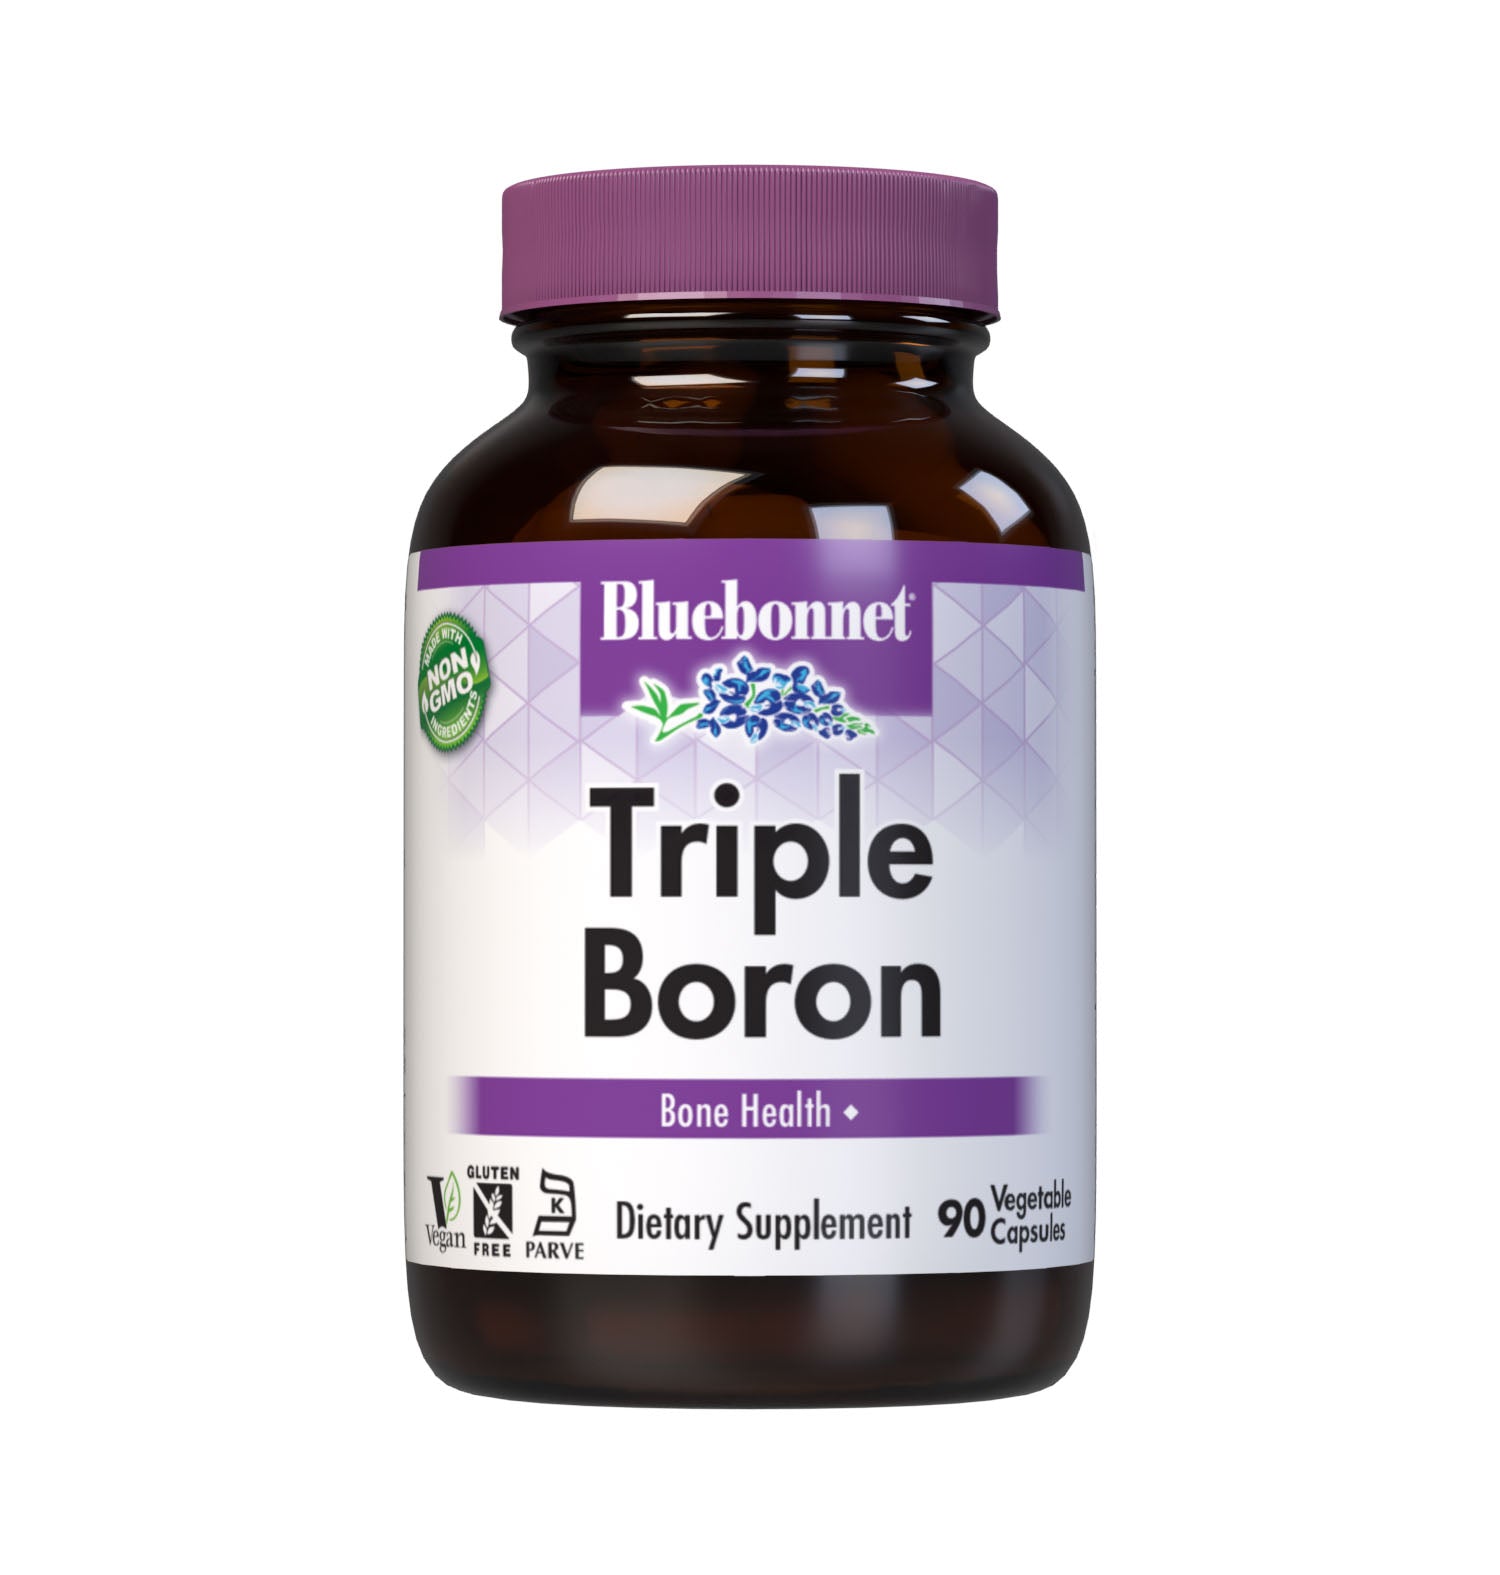 Bluebonnet's Triple Boron 3 mg 90 Vegetable Capsules are formulated with the trace mineral boron, which is multicomplexed with citrate, aspartate and glycinate. Boron is a trace element that helps support bone strength. #size_90 count